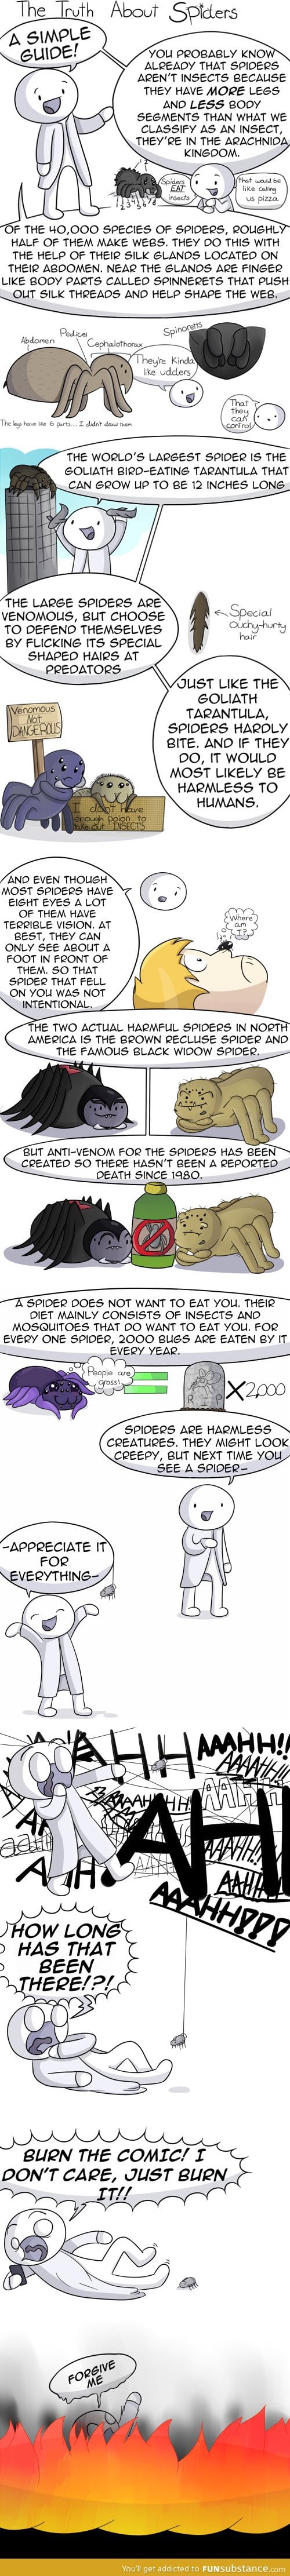 Truth about spiders